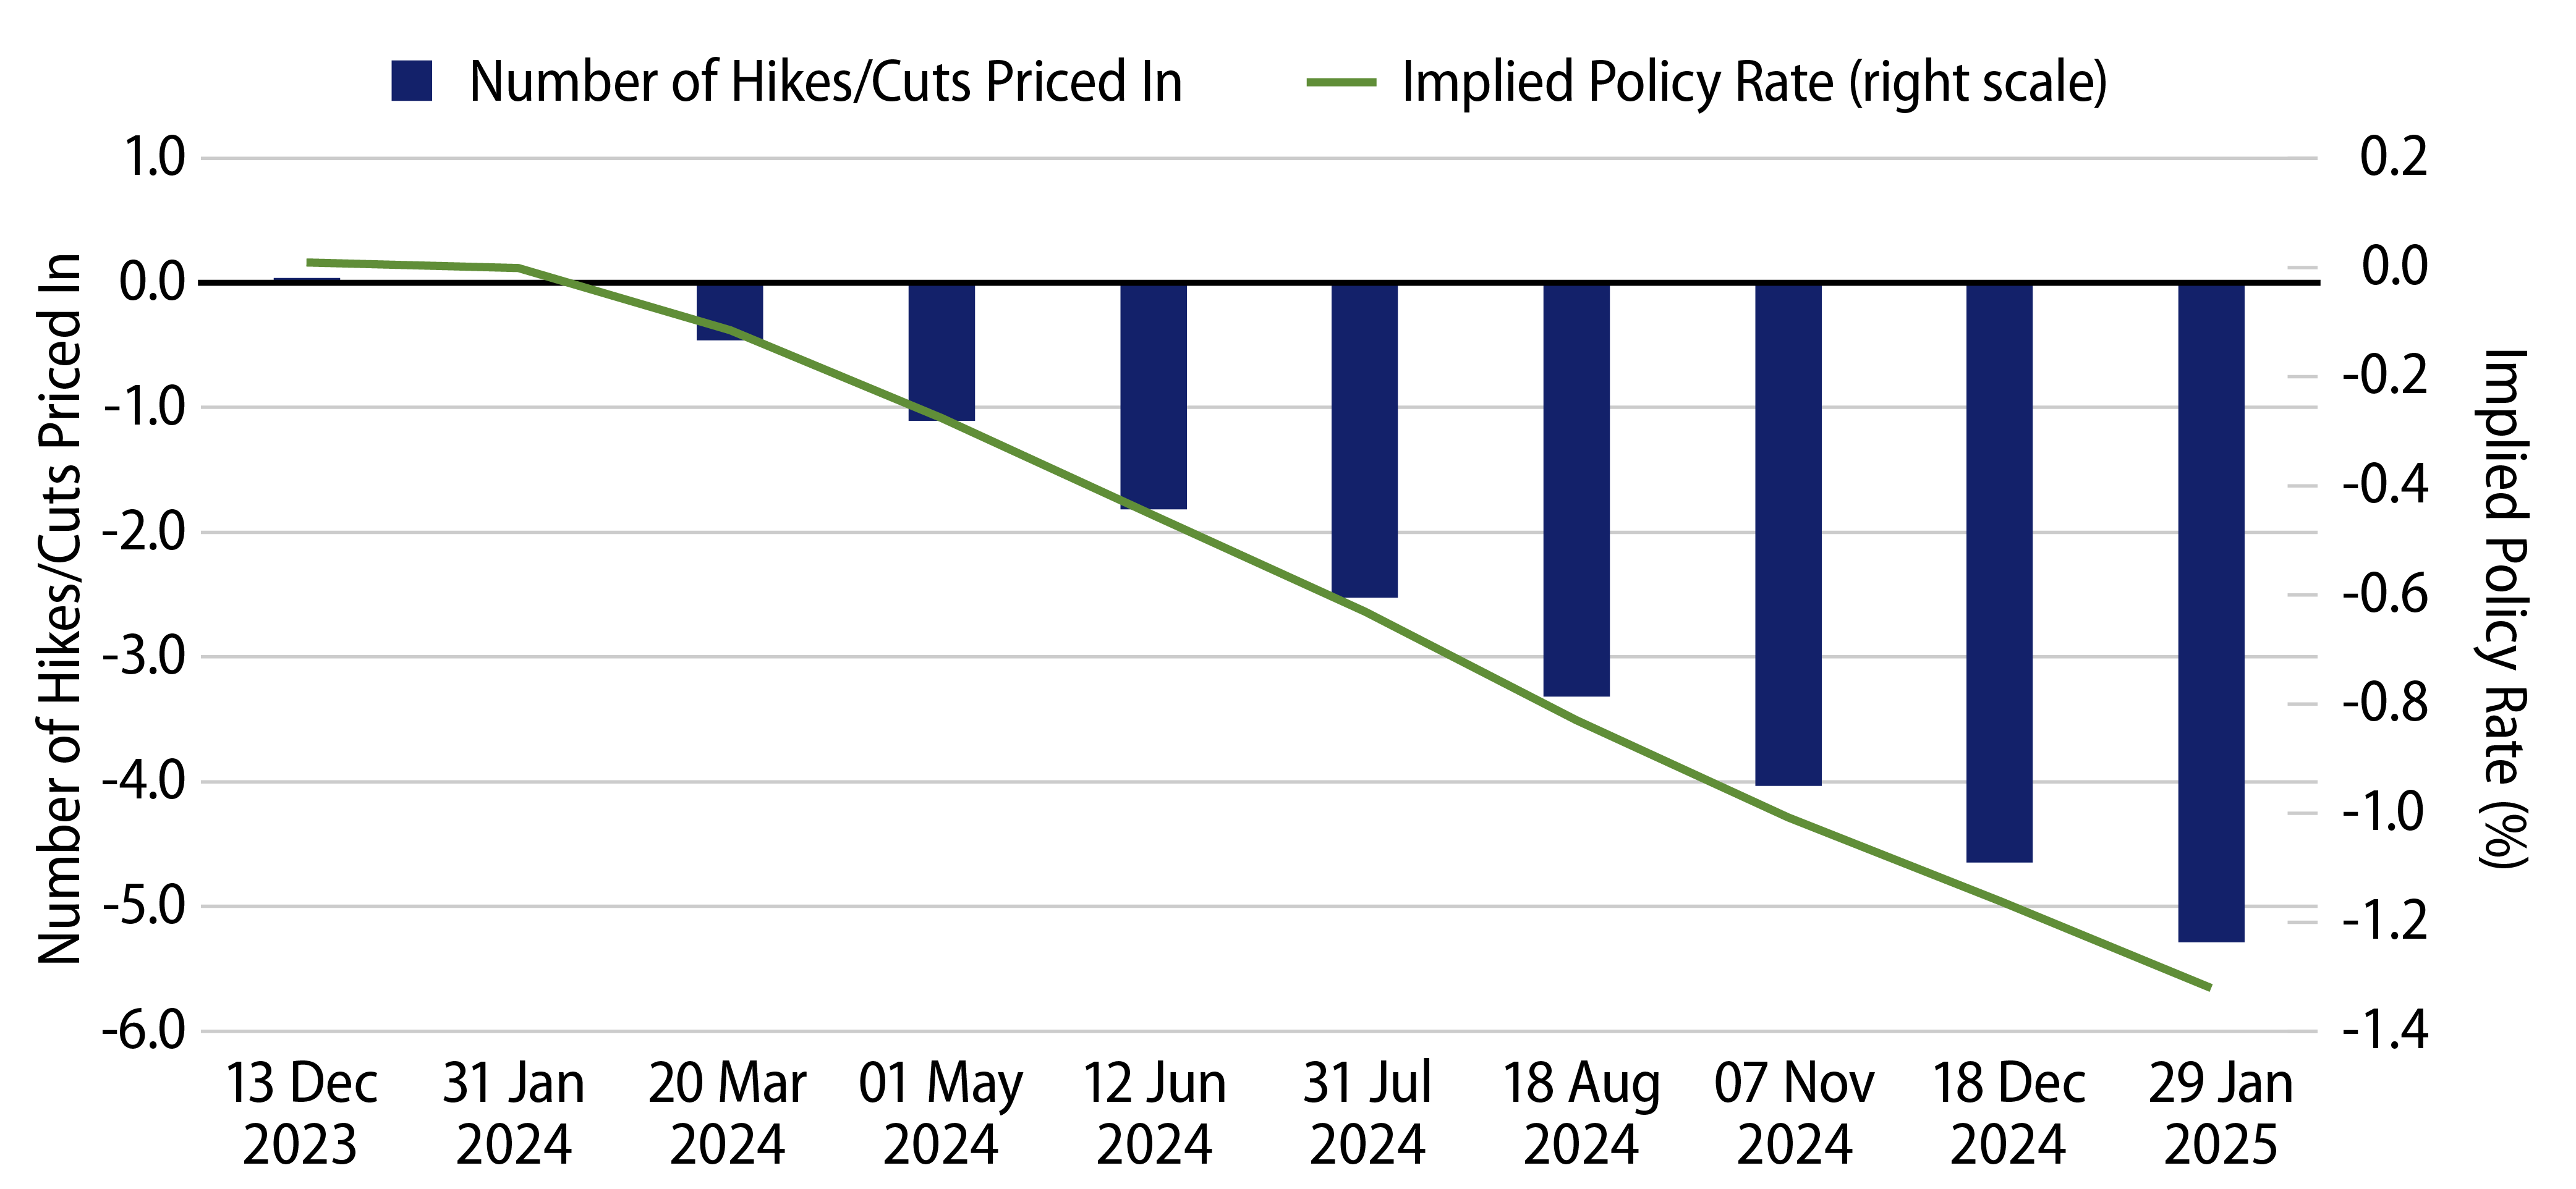 Explore Market Pricing Implies 100+ bps of Cuts in 2024